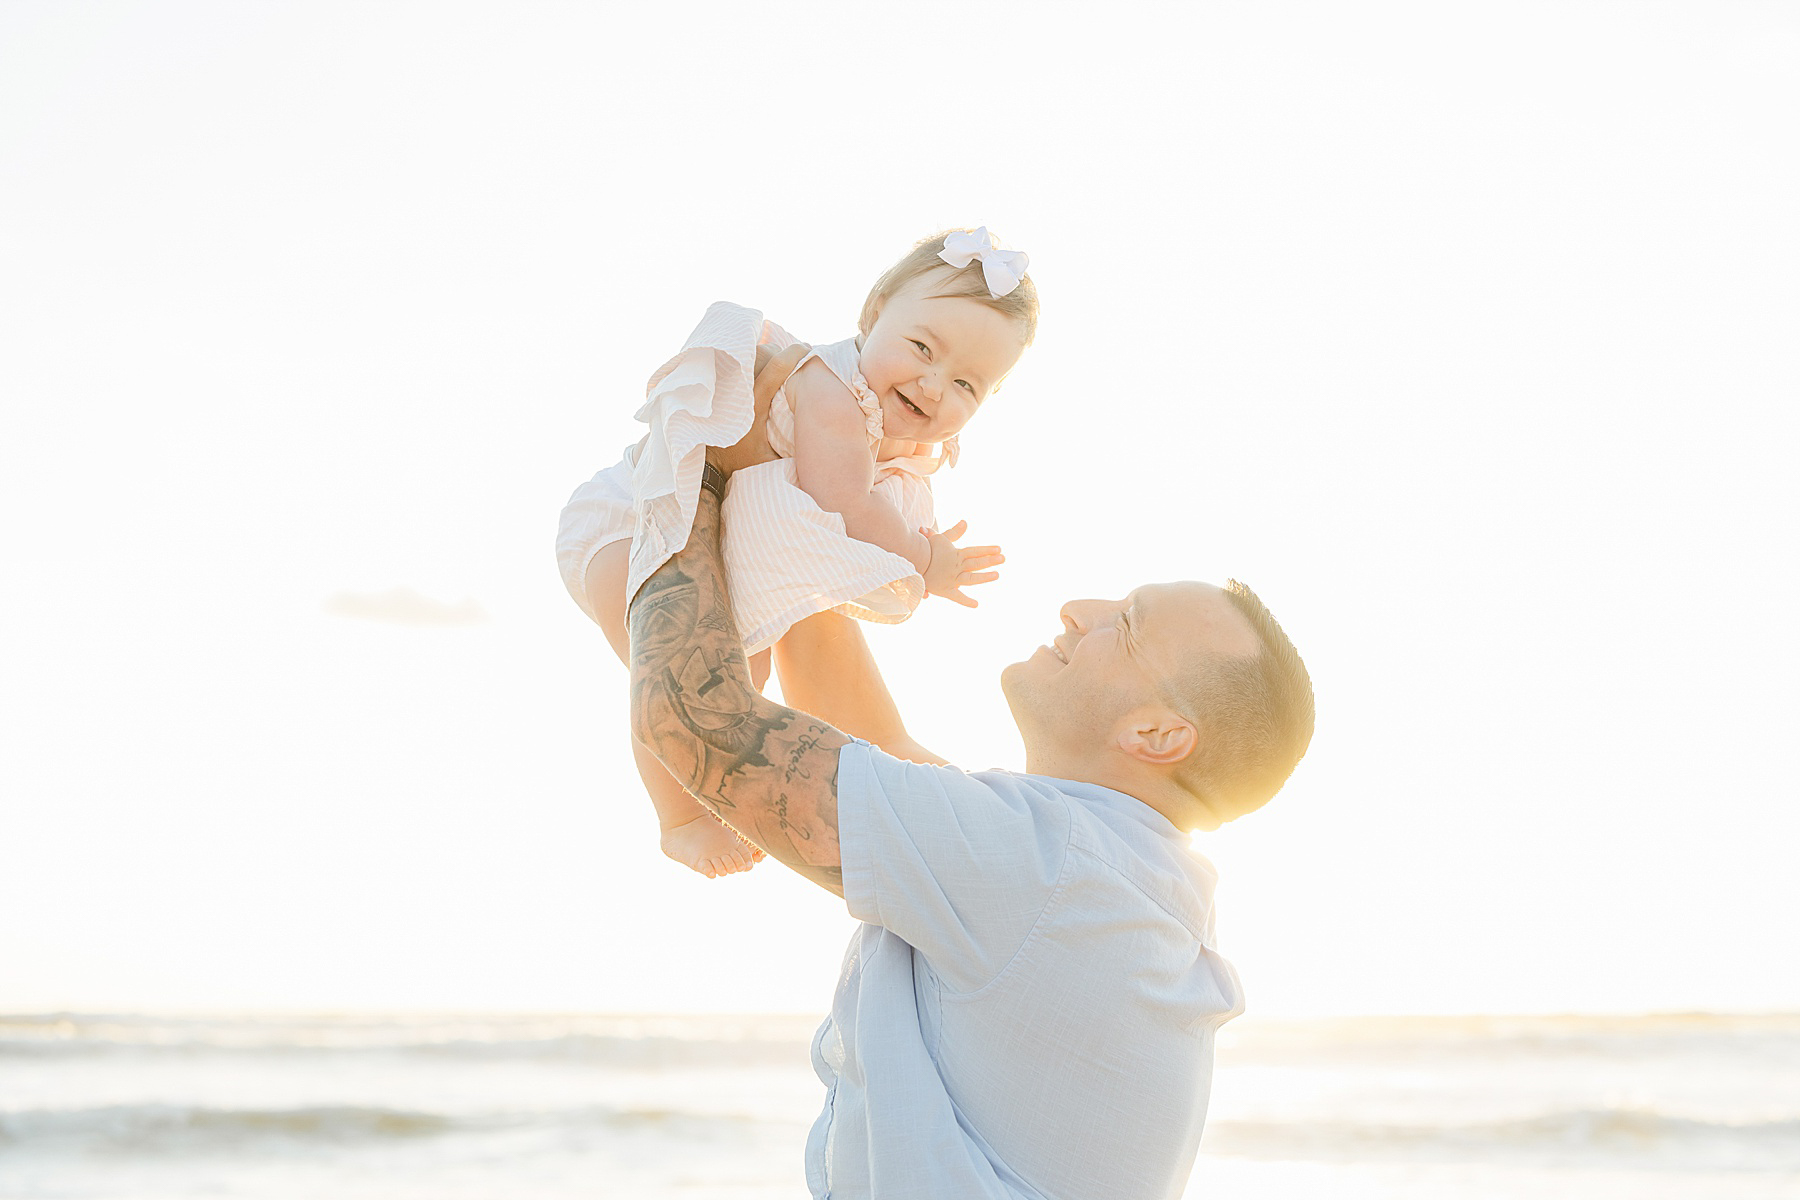 man in blue shirt holding baby girl with pink dress on the beach at sunrise smiling